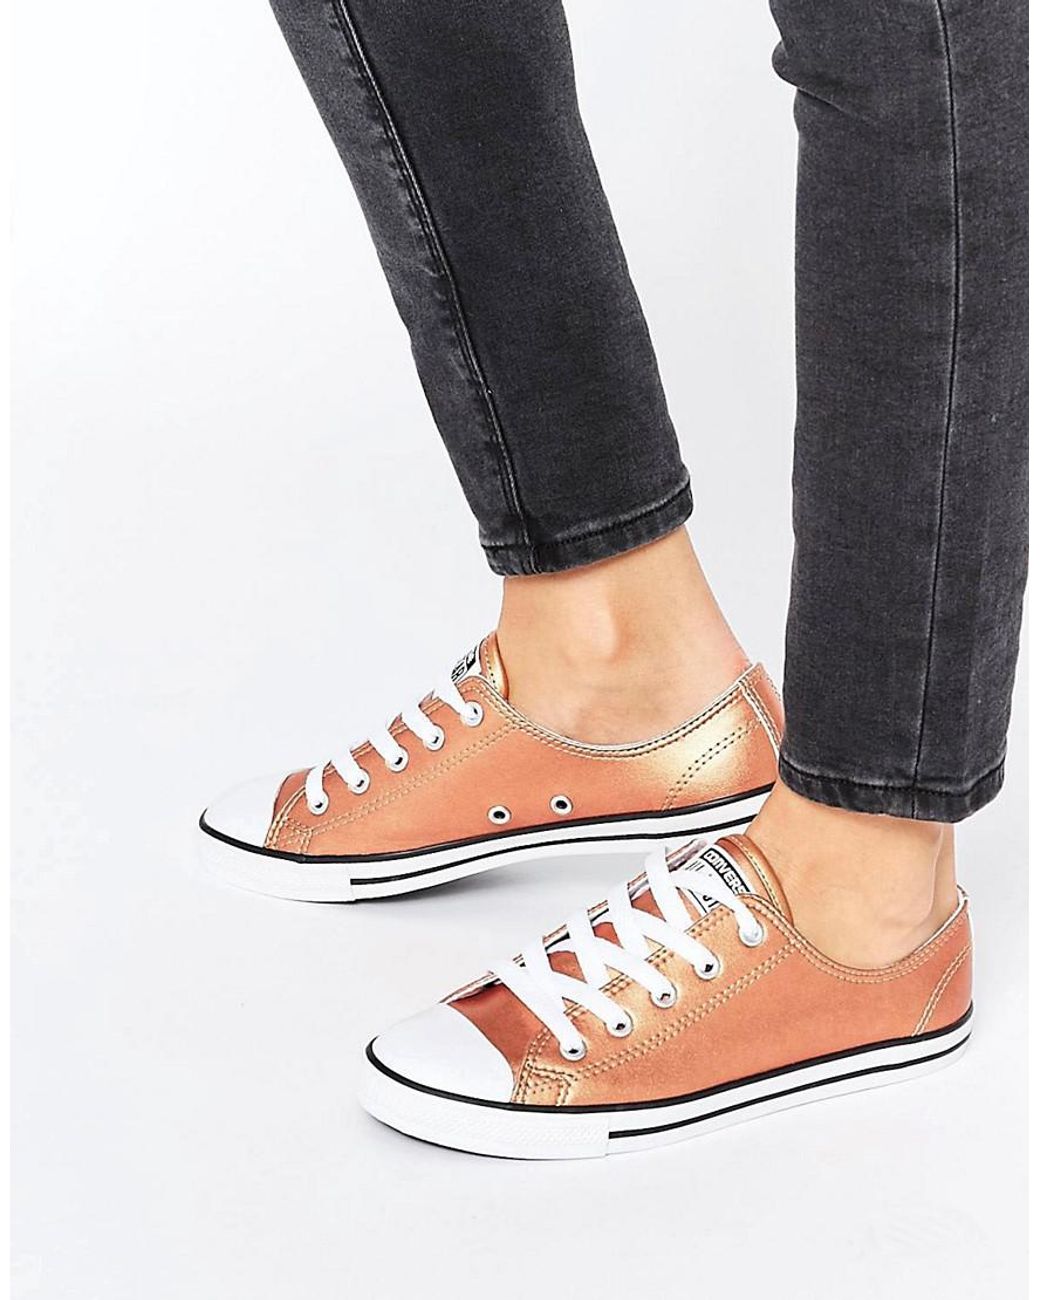 Converse All Star Dainty Rose Gold Metallic Trainers | Lyst UK